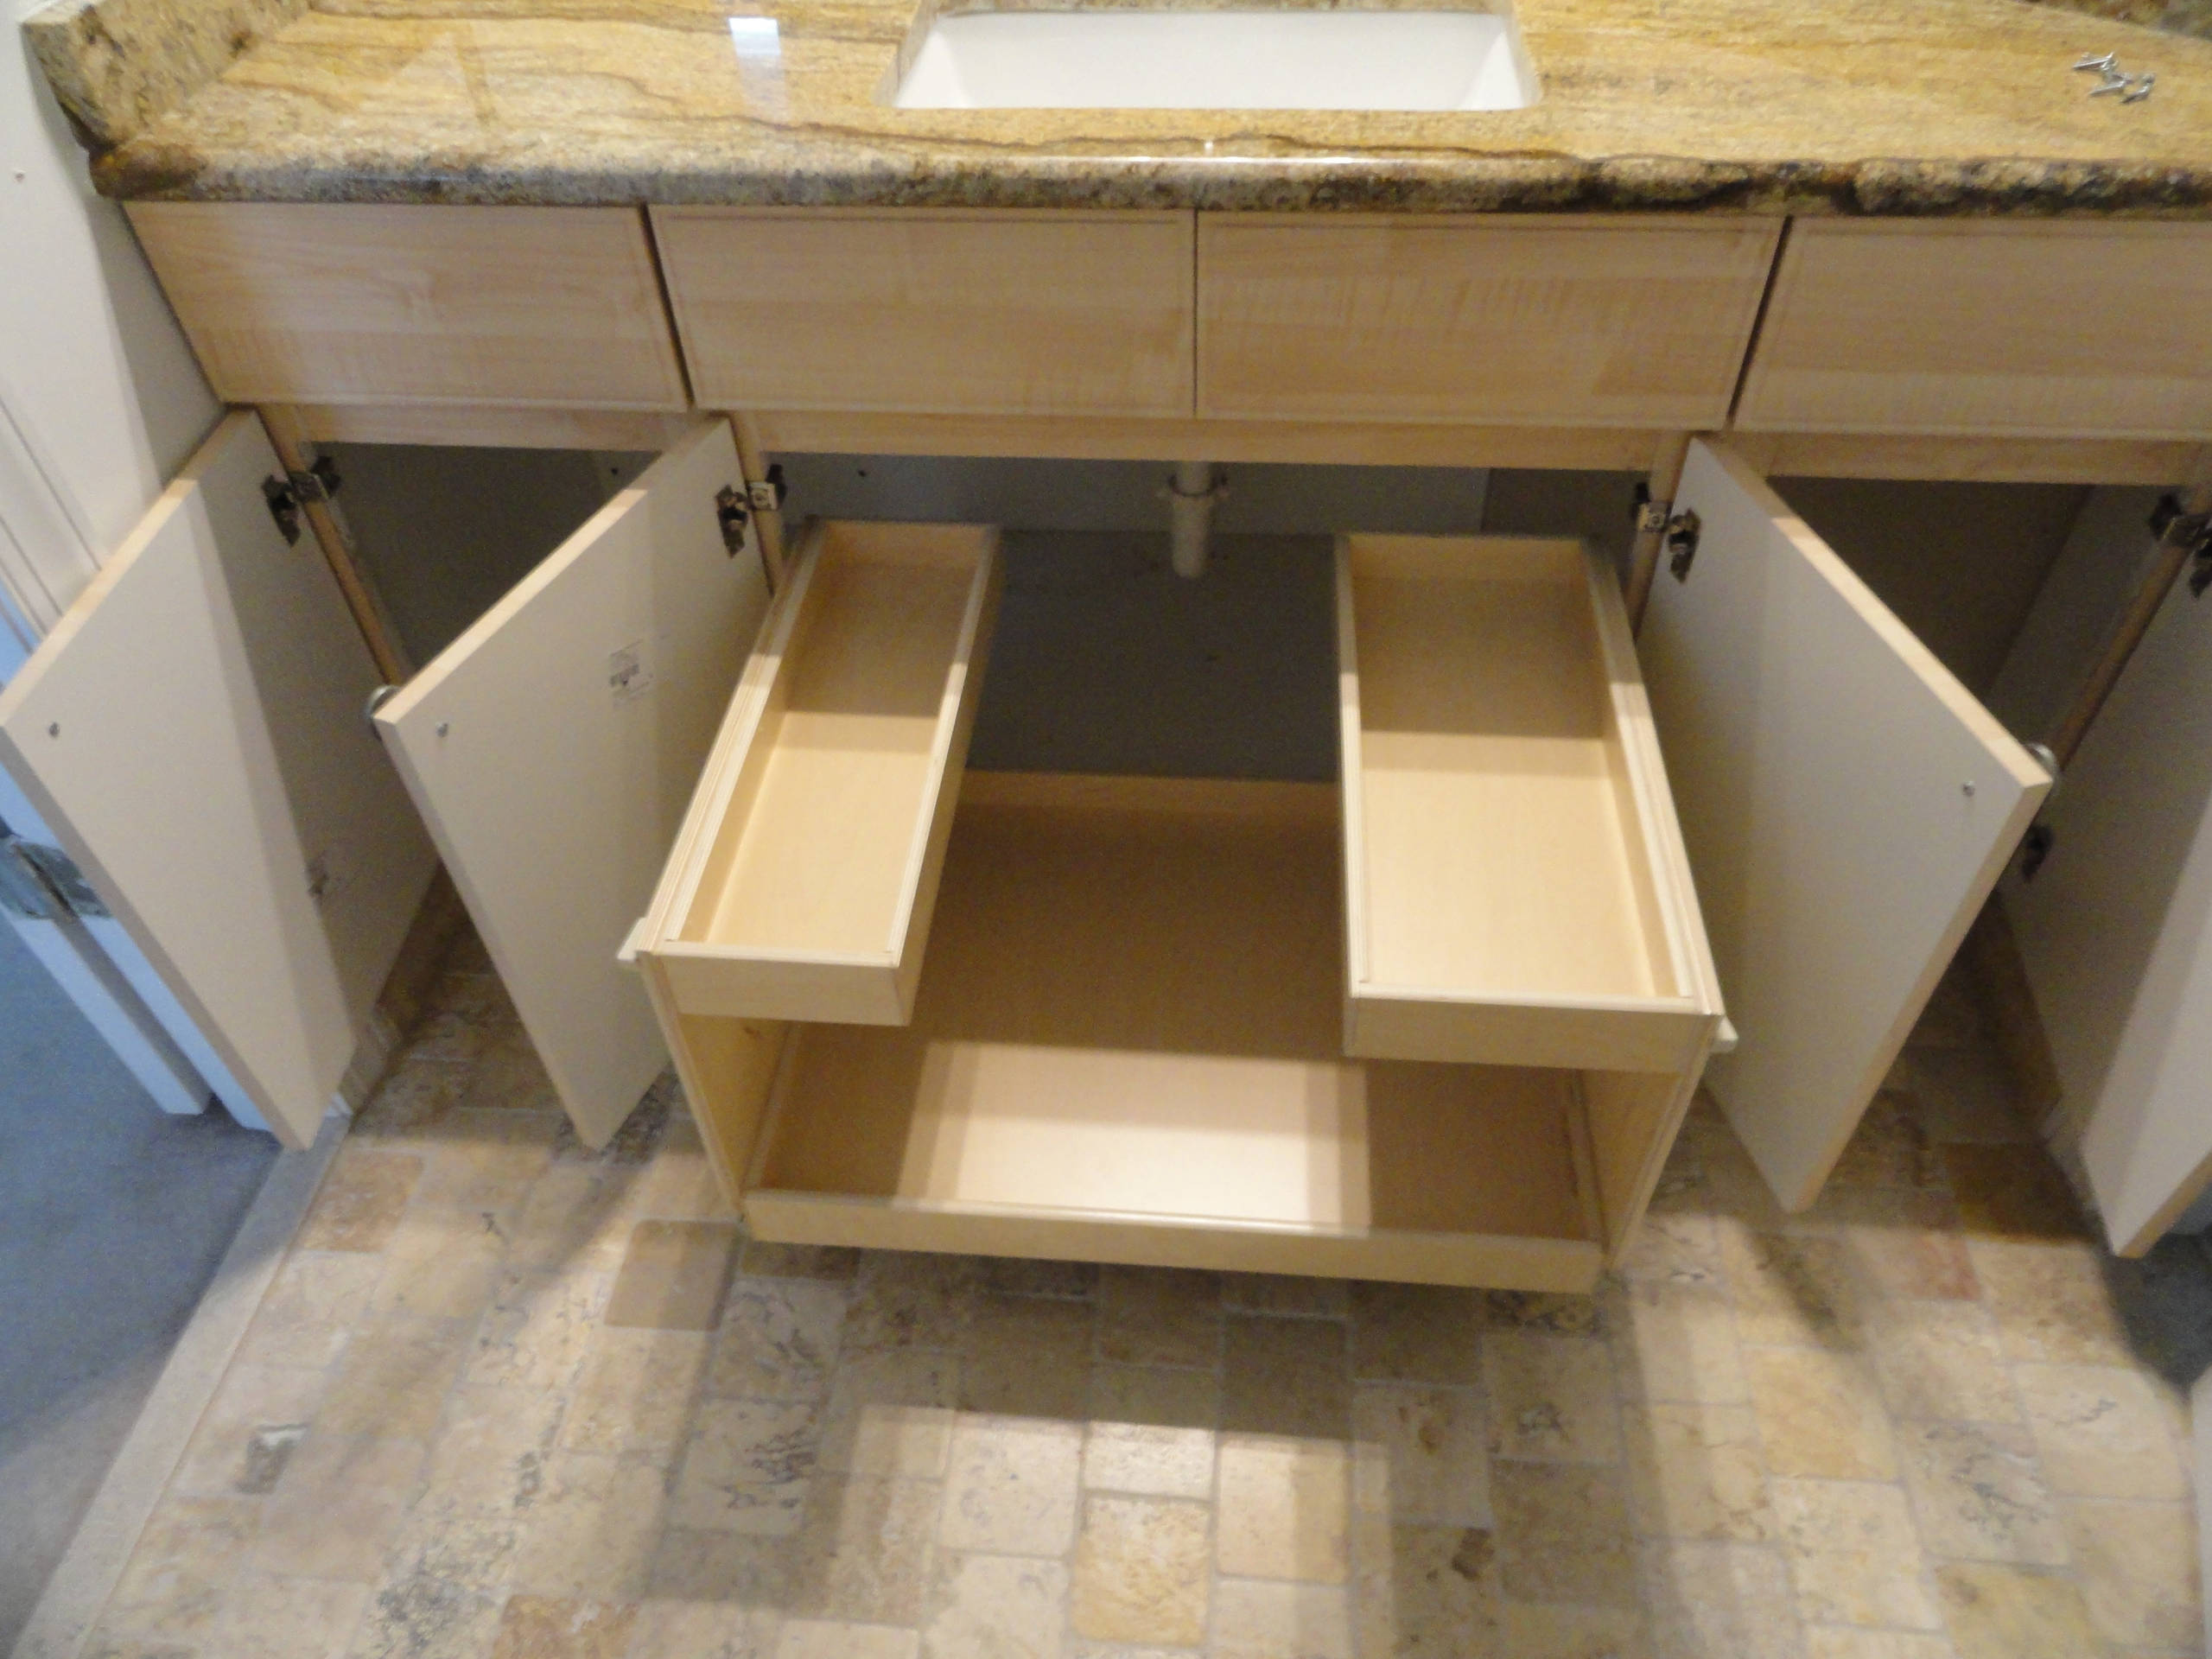 Pull Out Cabinet Bathroom Ideas Houzz, Slide Out Shelves For Bathroom Cabinets